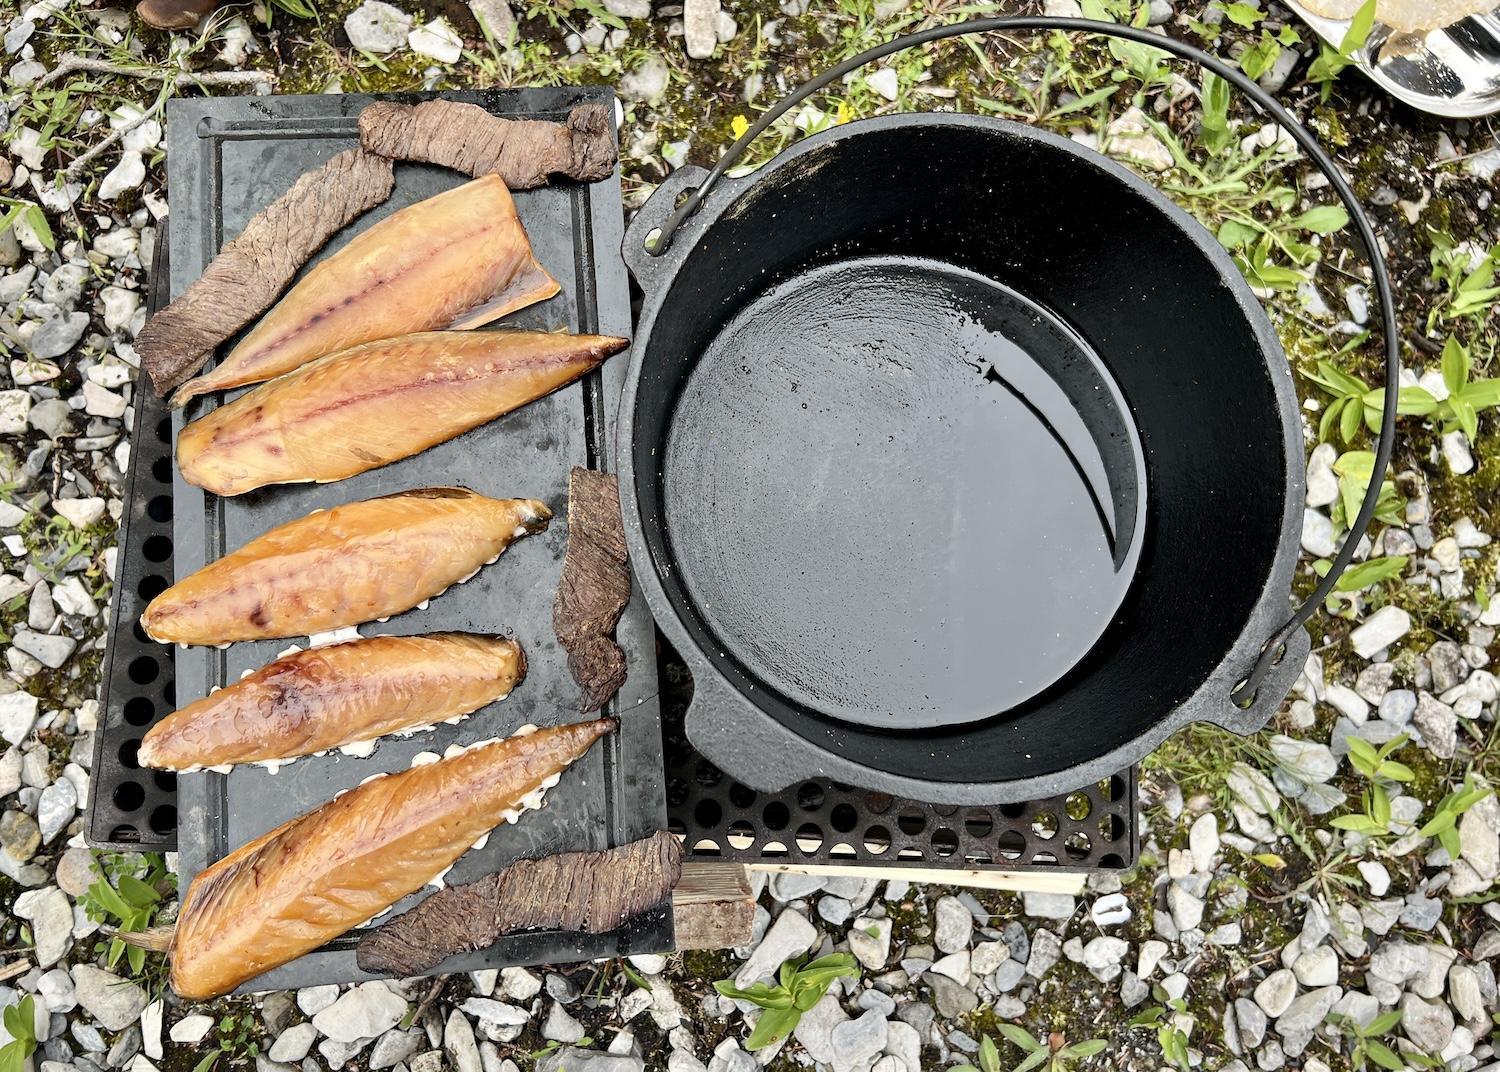 On the Discover Mekapisk outing with Gros Morne Adventures, marinated moose and smoked mackerel are warmed up at a campfire on an isolated beach.